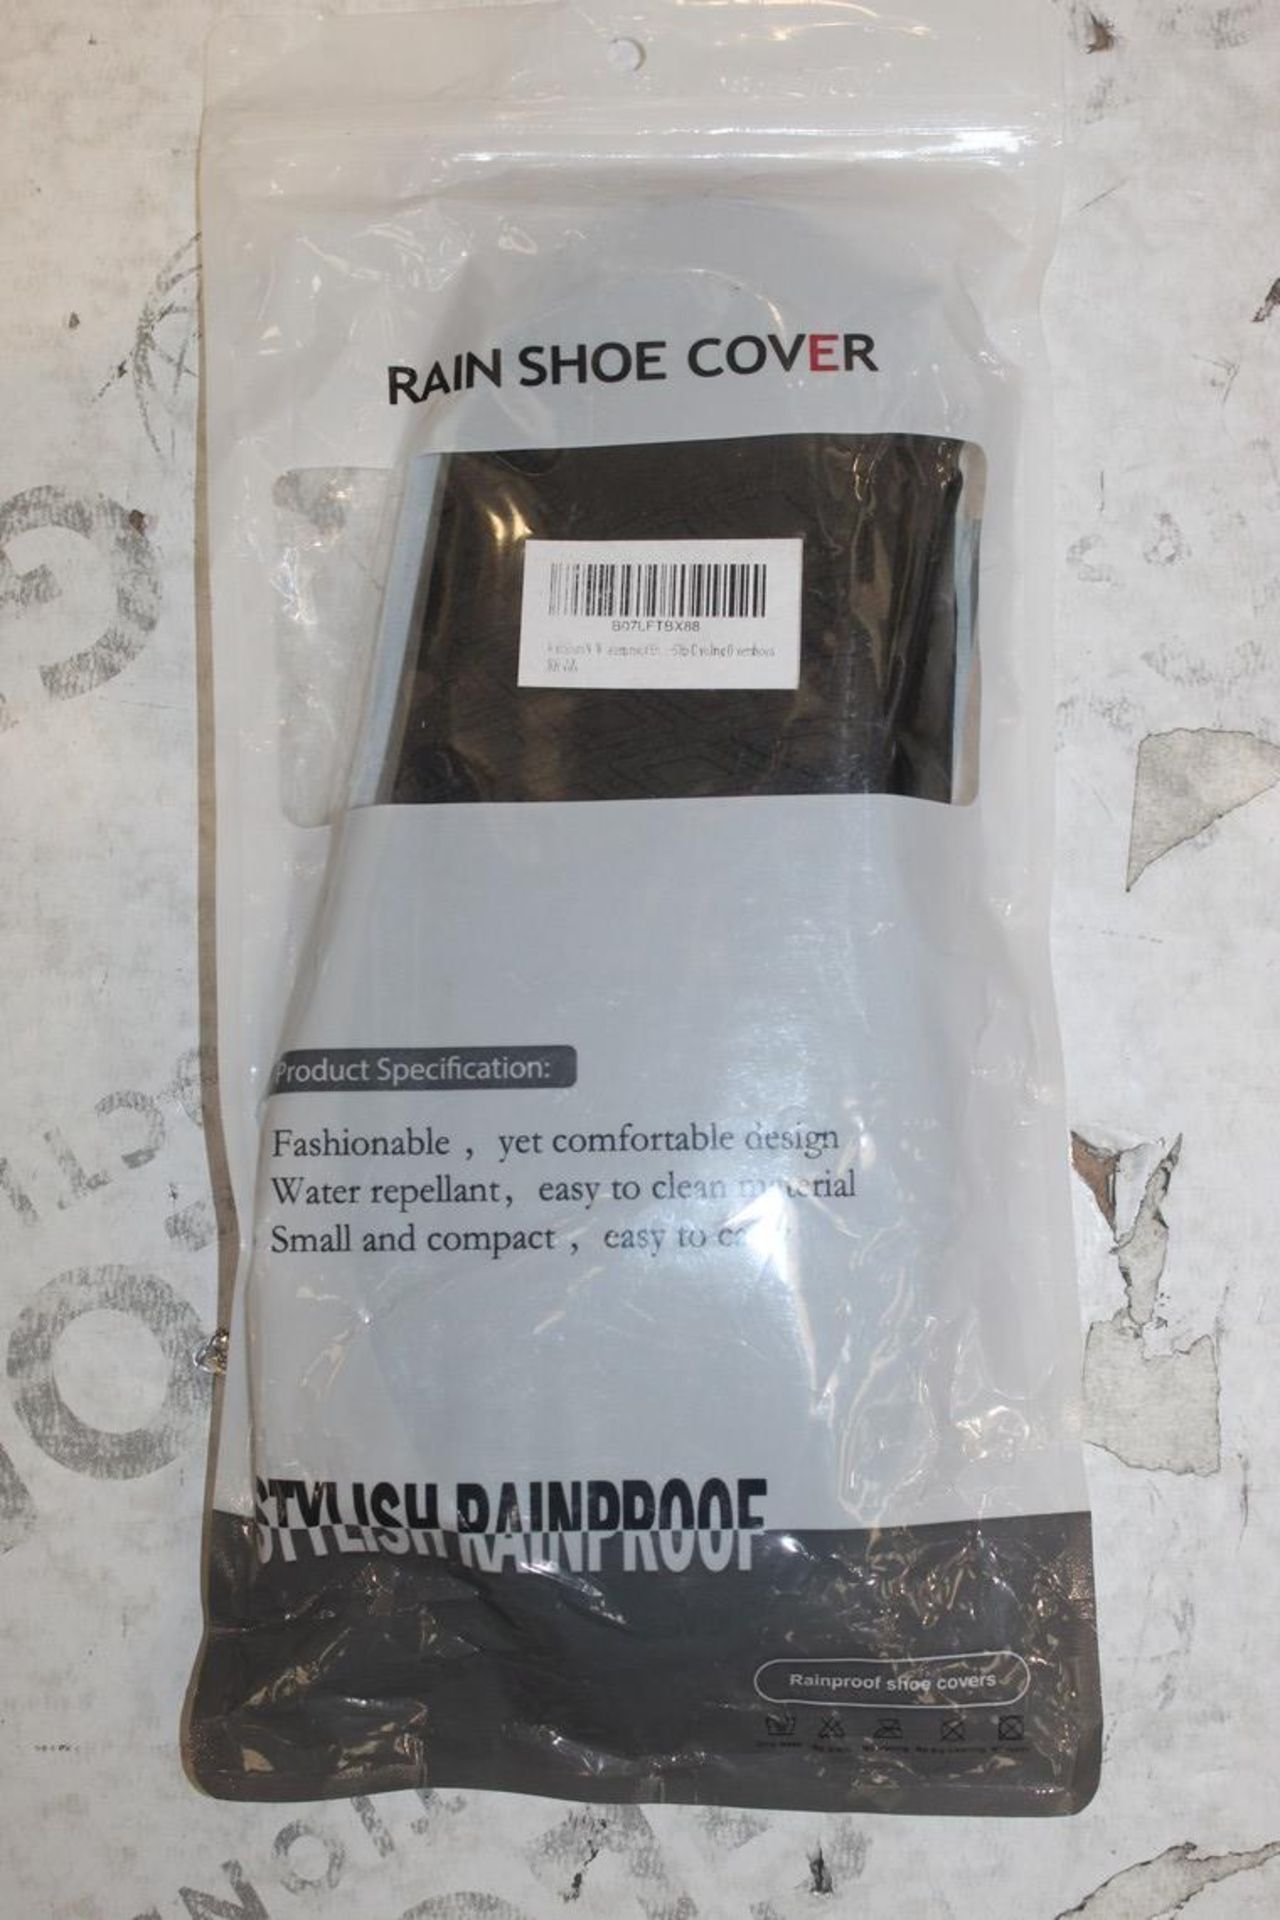 Lot To Contain 10 Brand New Pairs Of Rain ? Combined RRP £100 (Pictures Are For Illustration